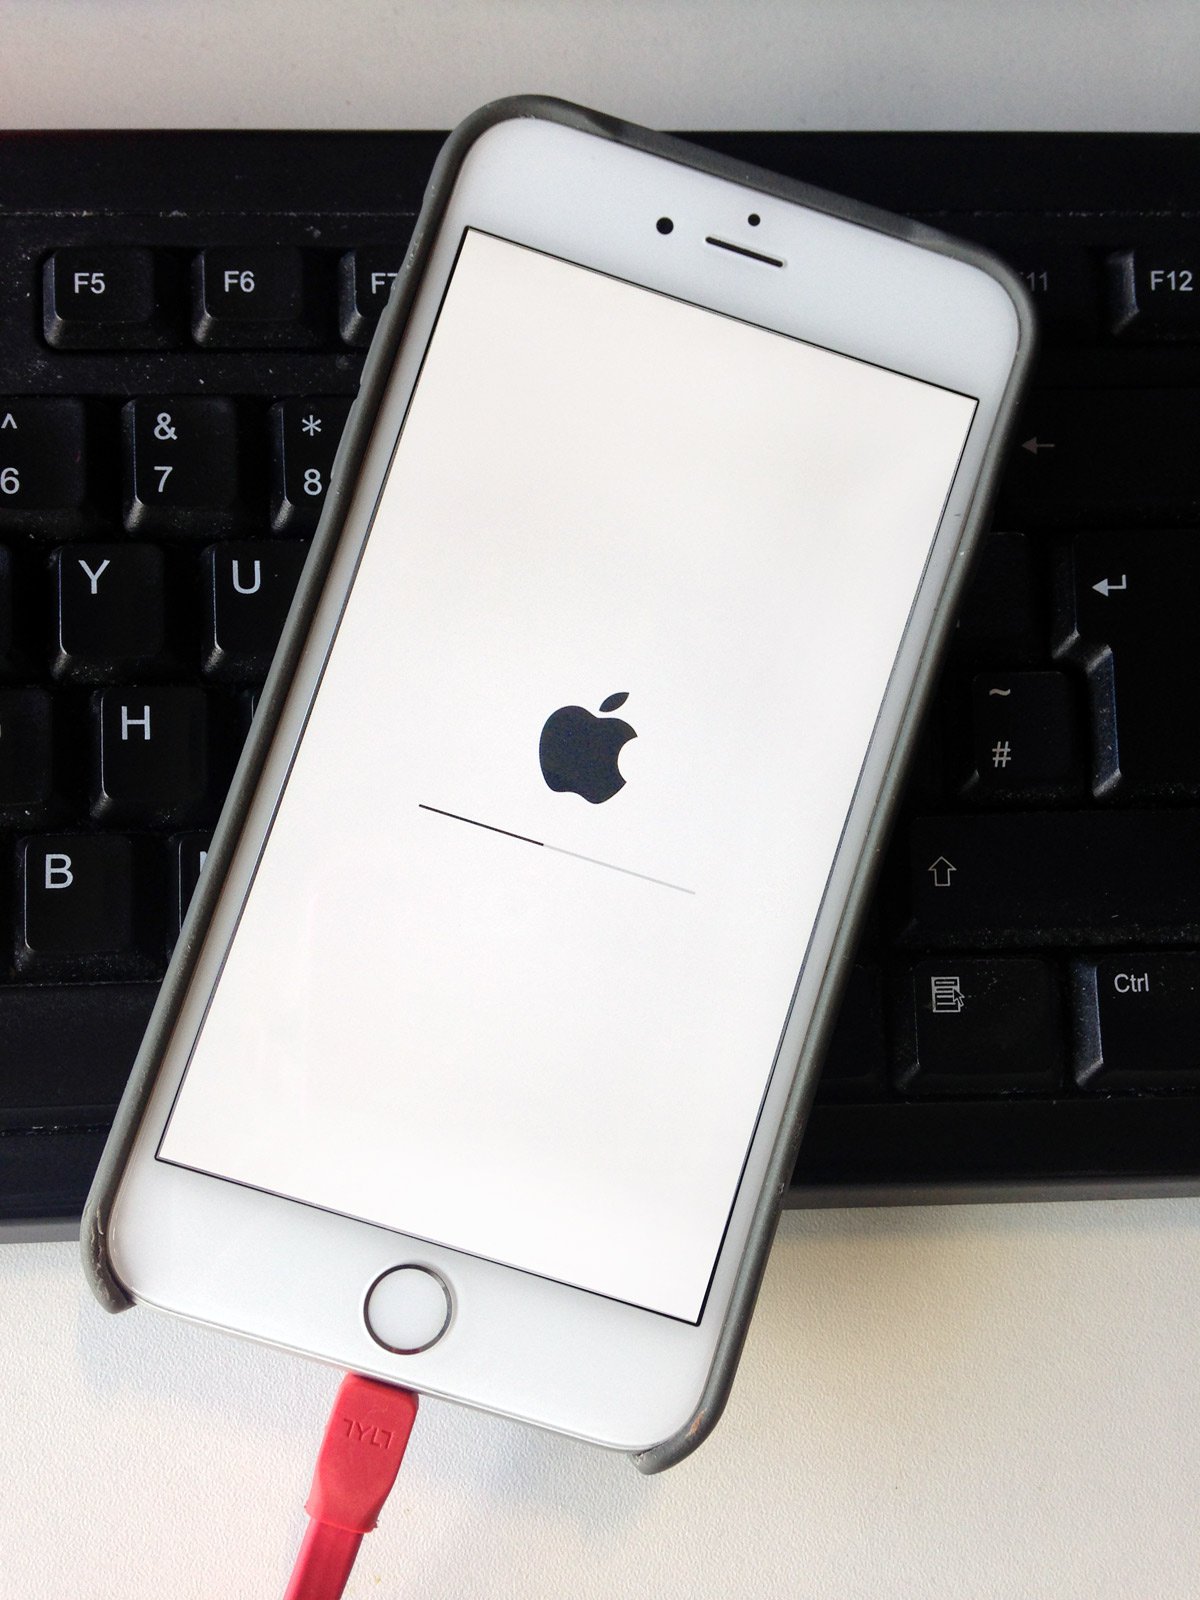 How to reset an iPhone 3